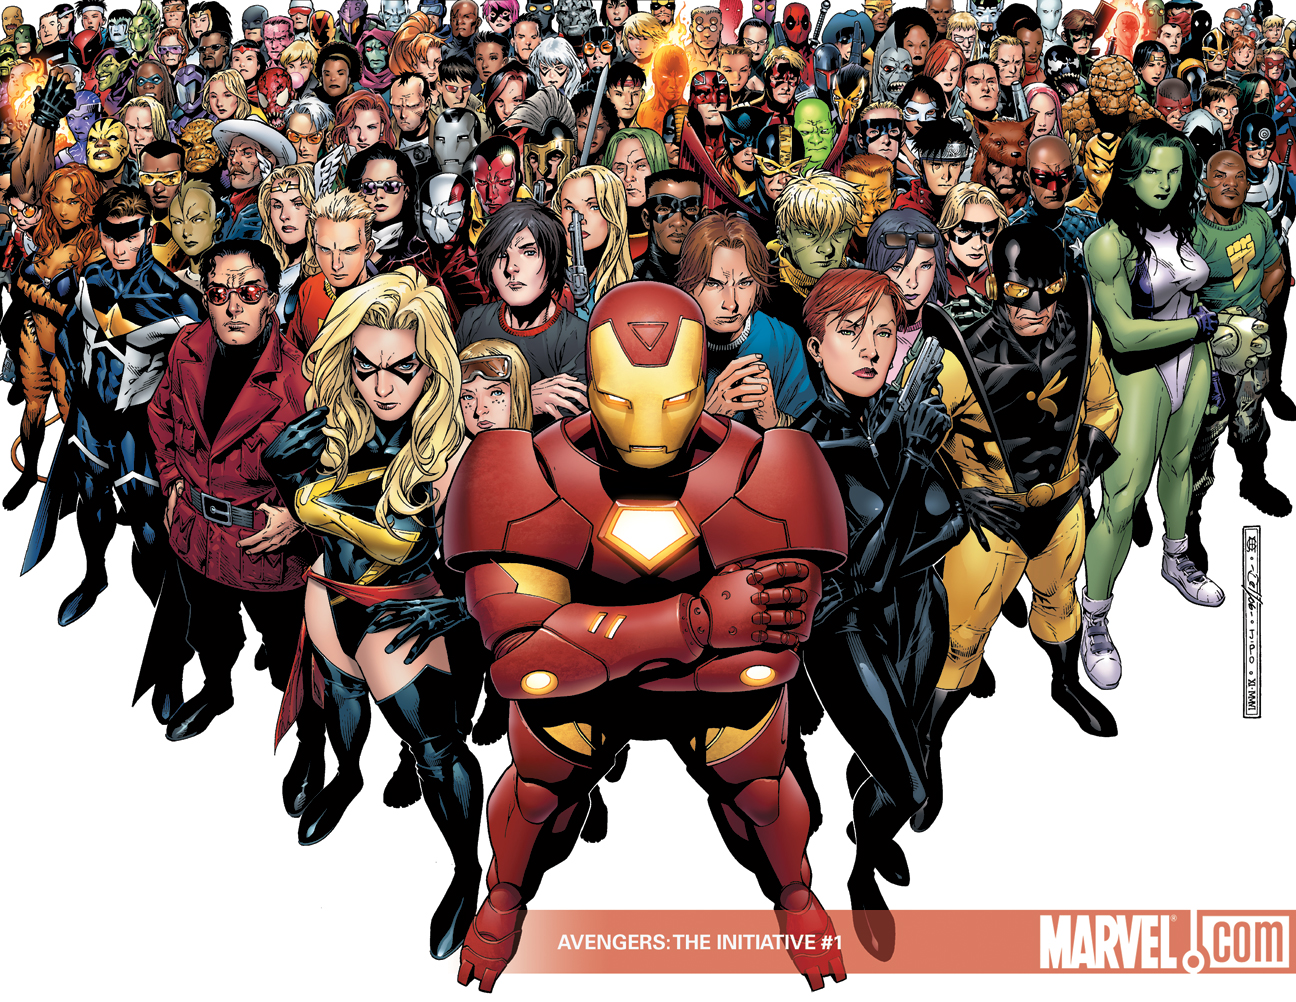 Which of the Listed Movie Marvel Characters Would You Like To See Visit TV’s Agents of S.H.I.E.L.D.?